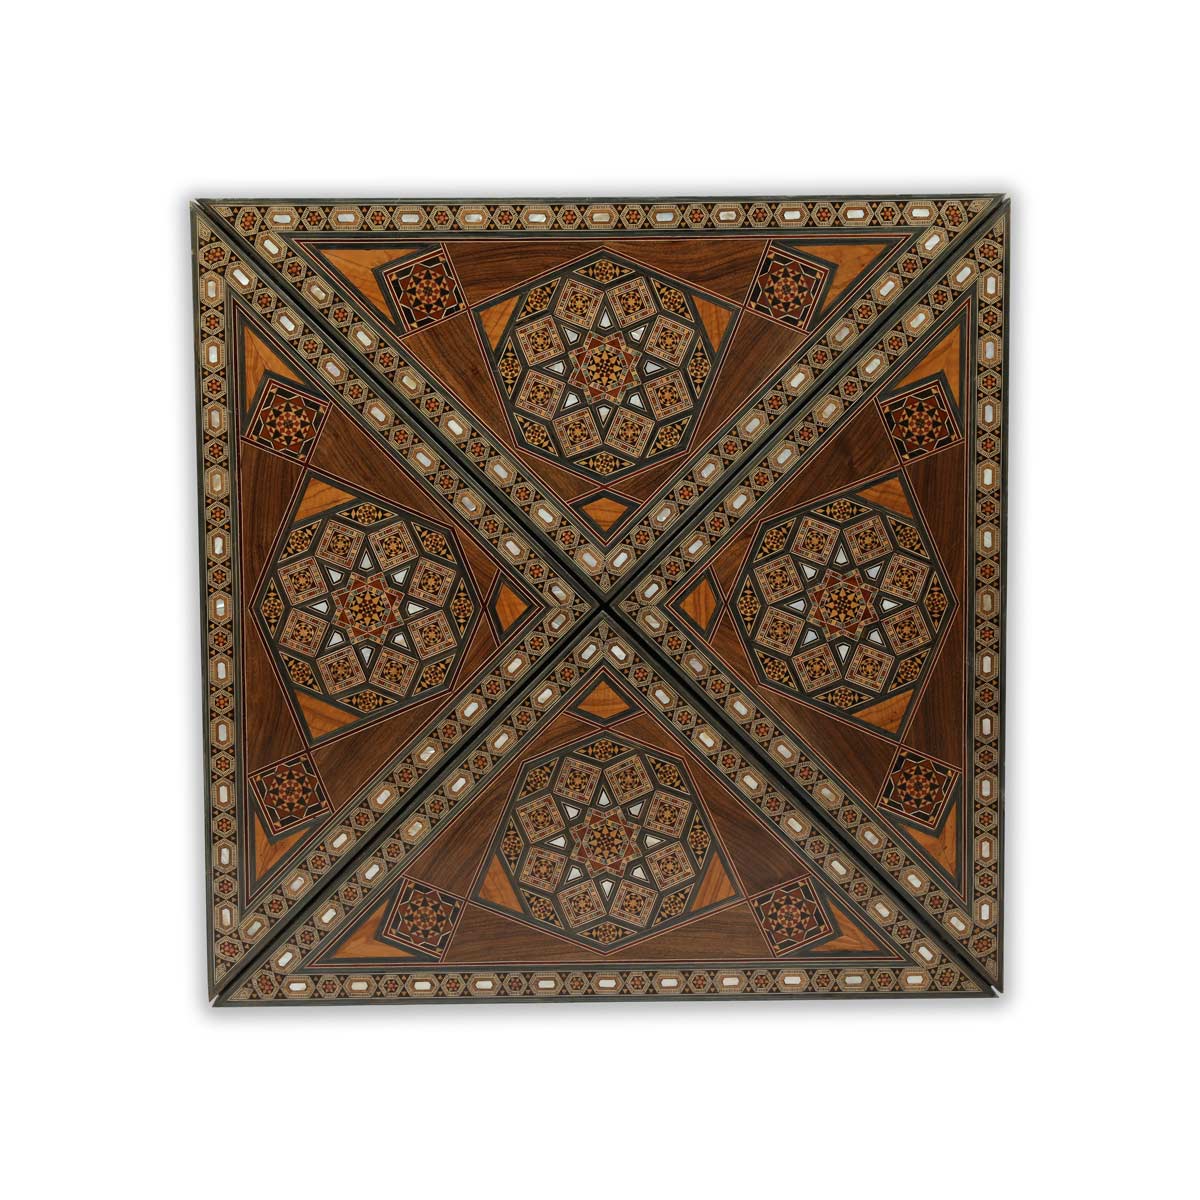 Folder Table Top View of Syrian Mosaic Patterned Marquetry Inlaid Wooden Playing Table